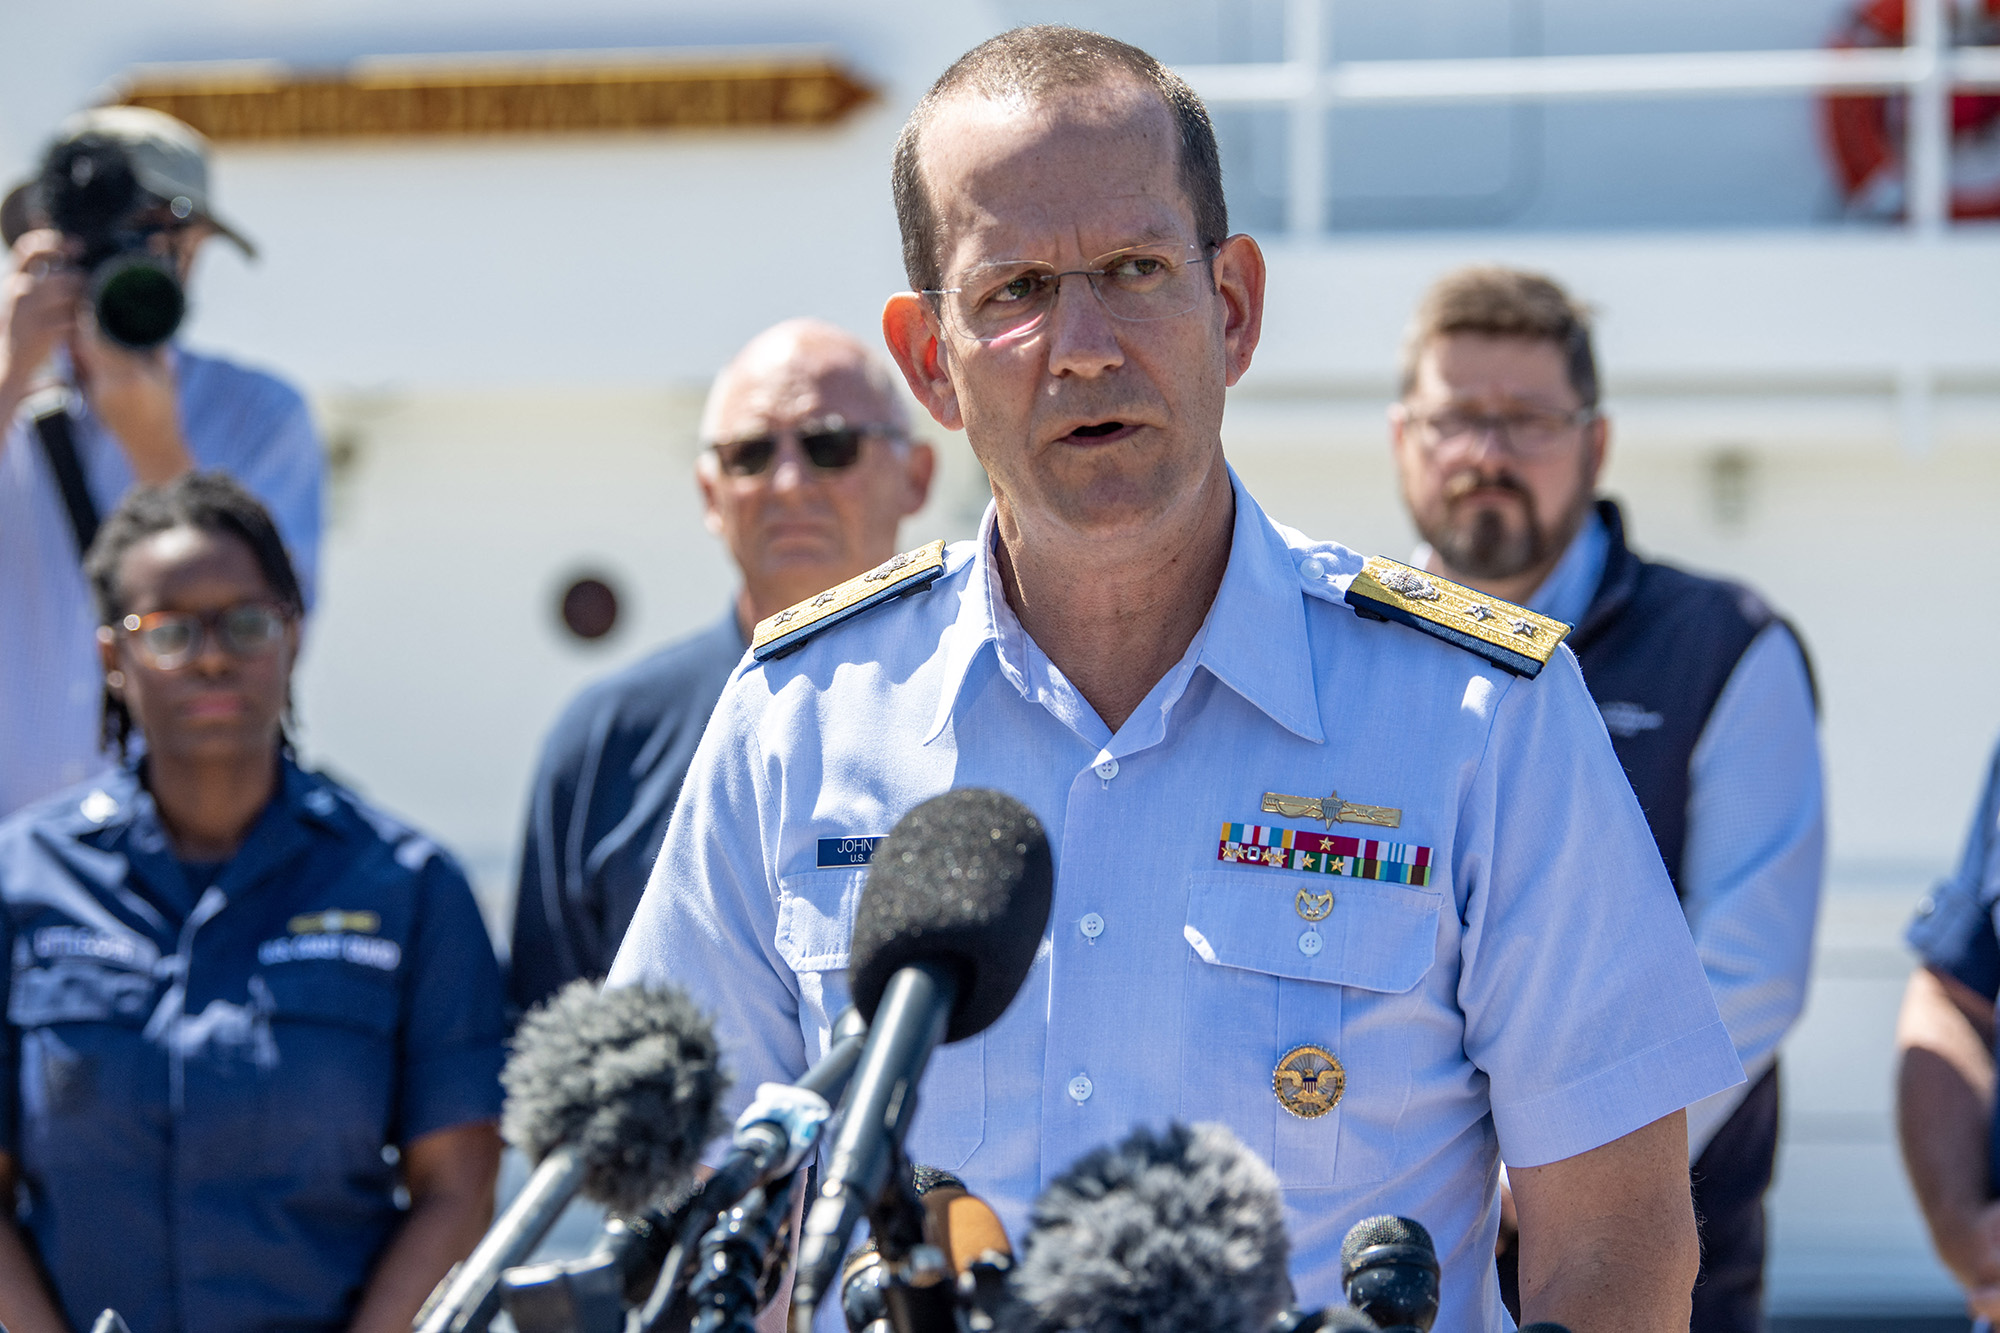 US Rear Adm. John Mauger, the First Coast Guard District commander, speaks at a press conference at the US Coast Guard Base Boston in Boston, Massachusetts, on June 22.